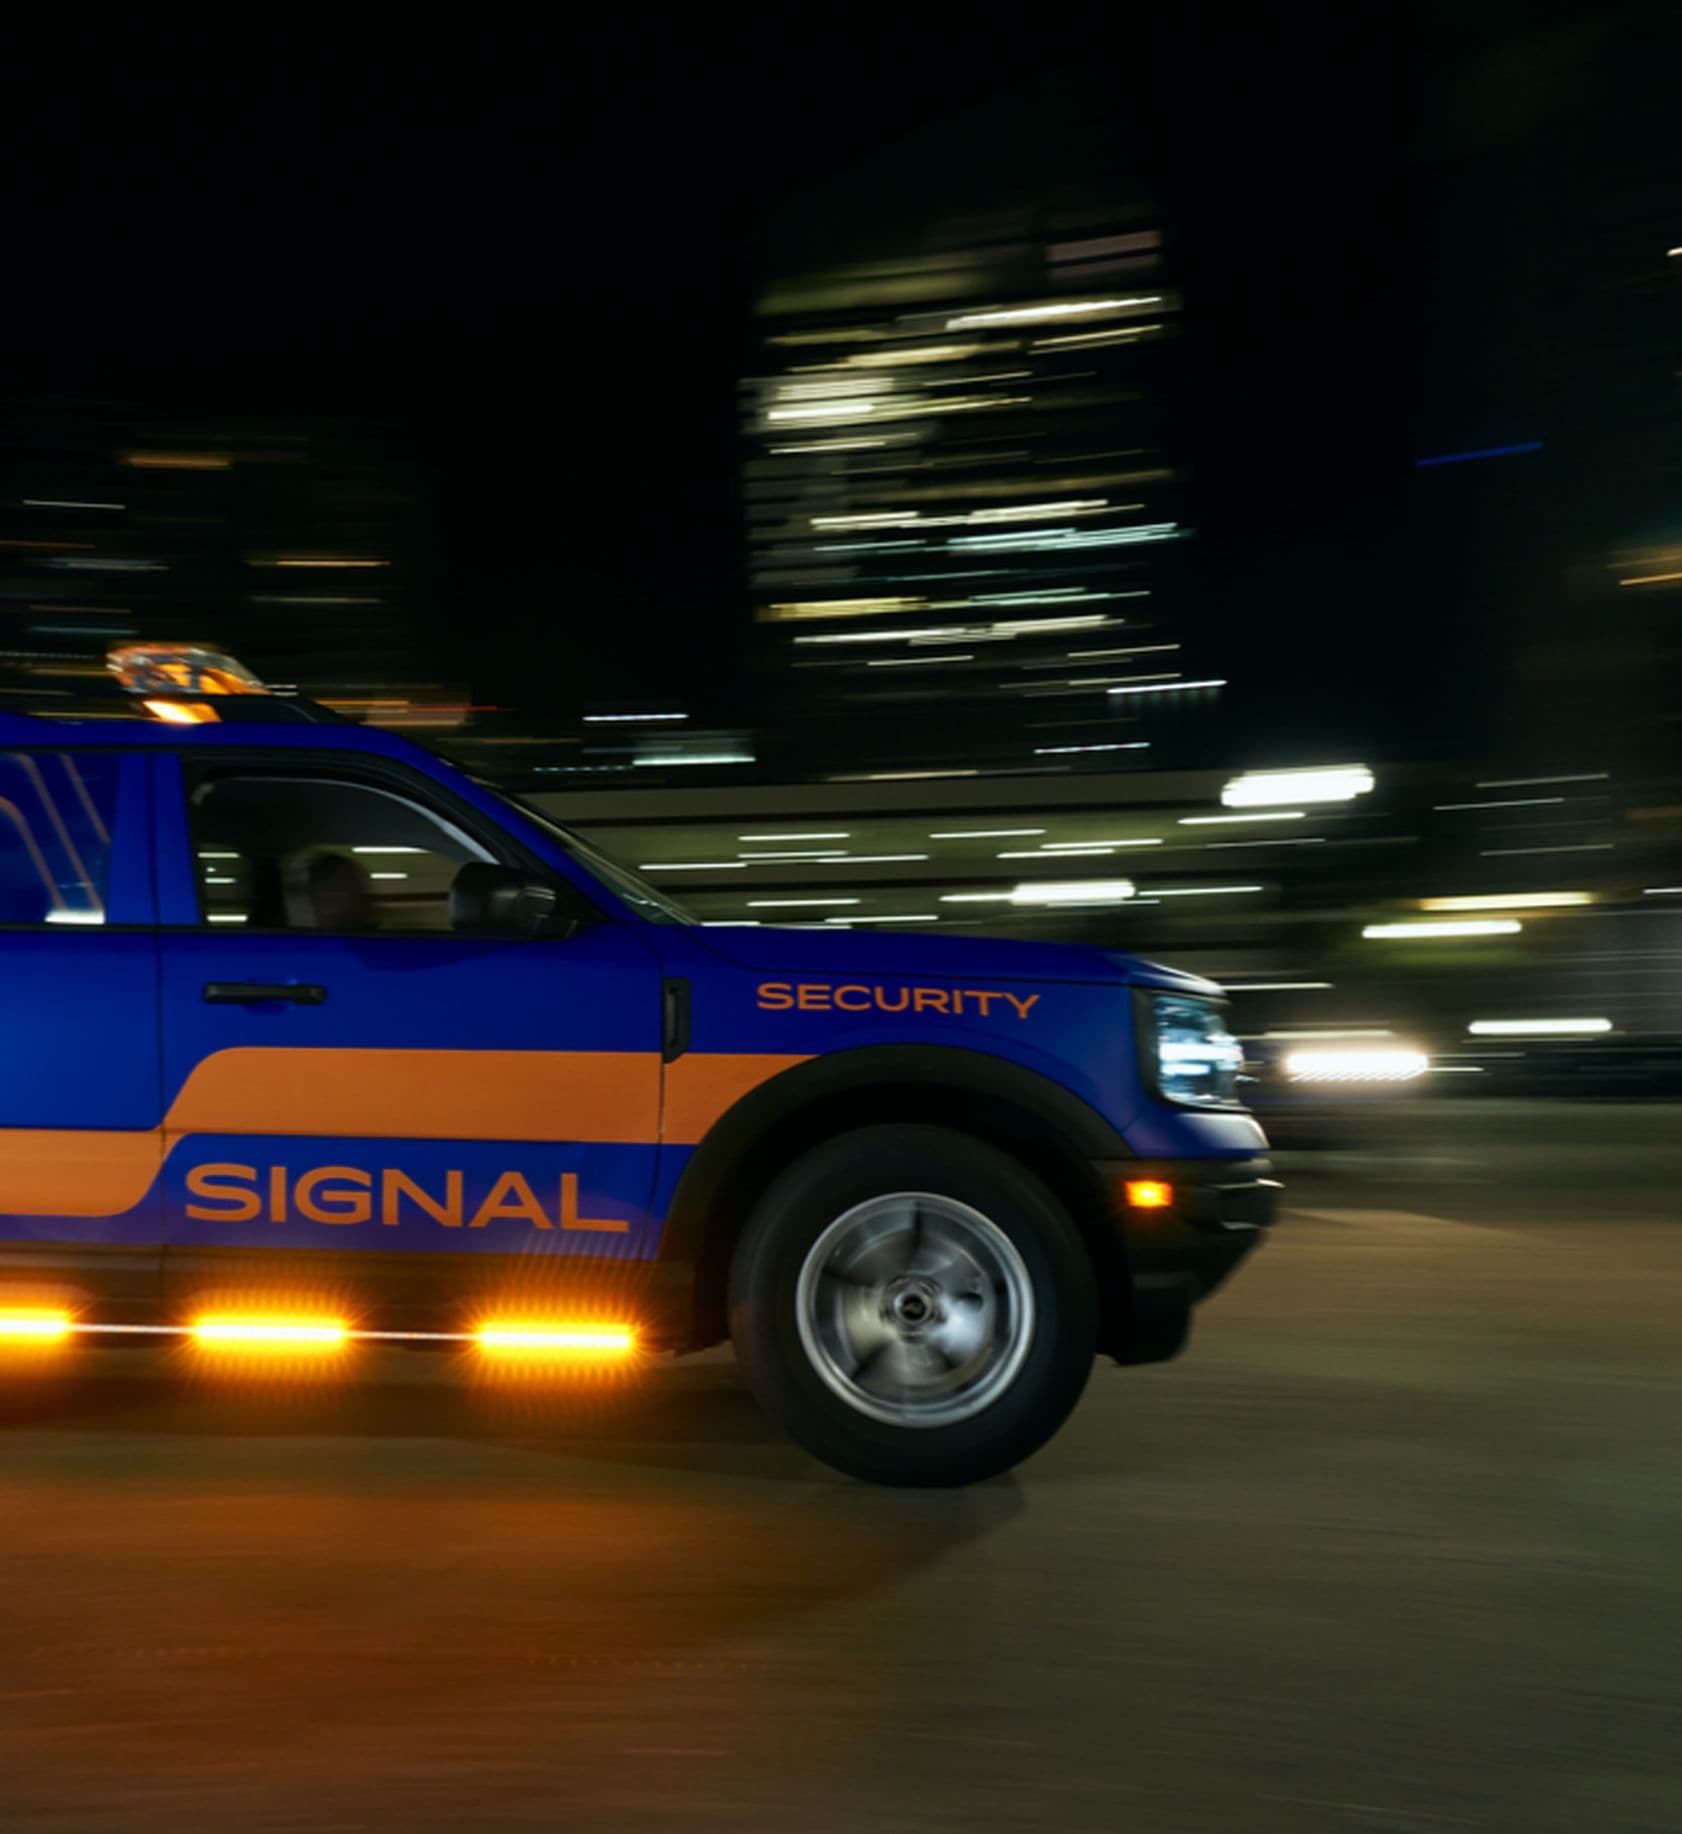 Signal apartment security patrol car driving down the street